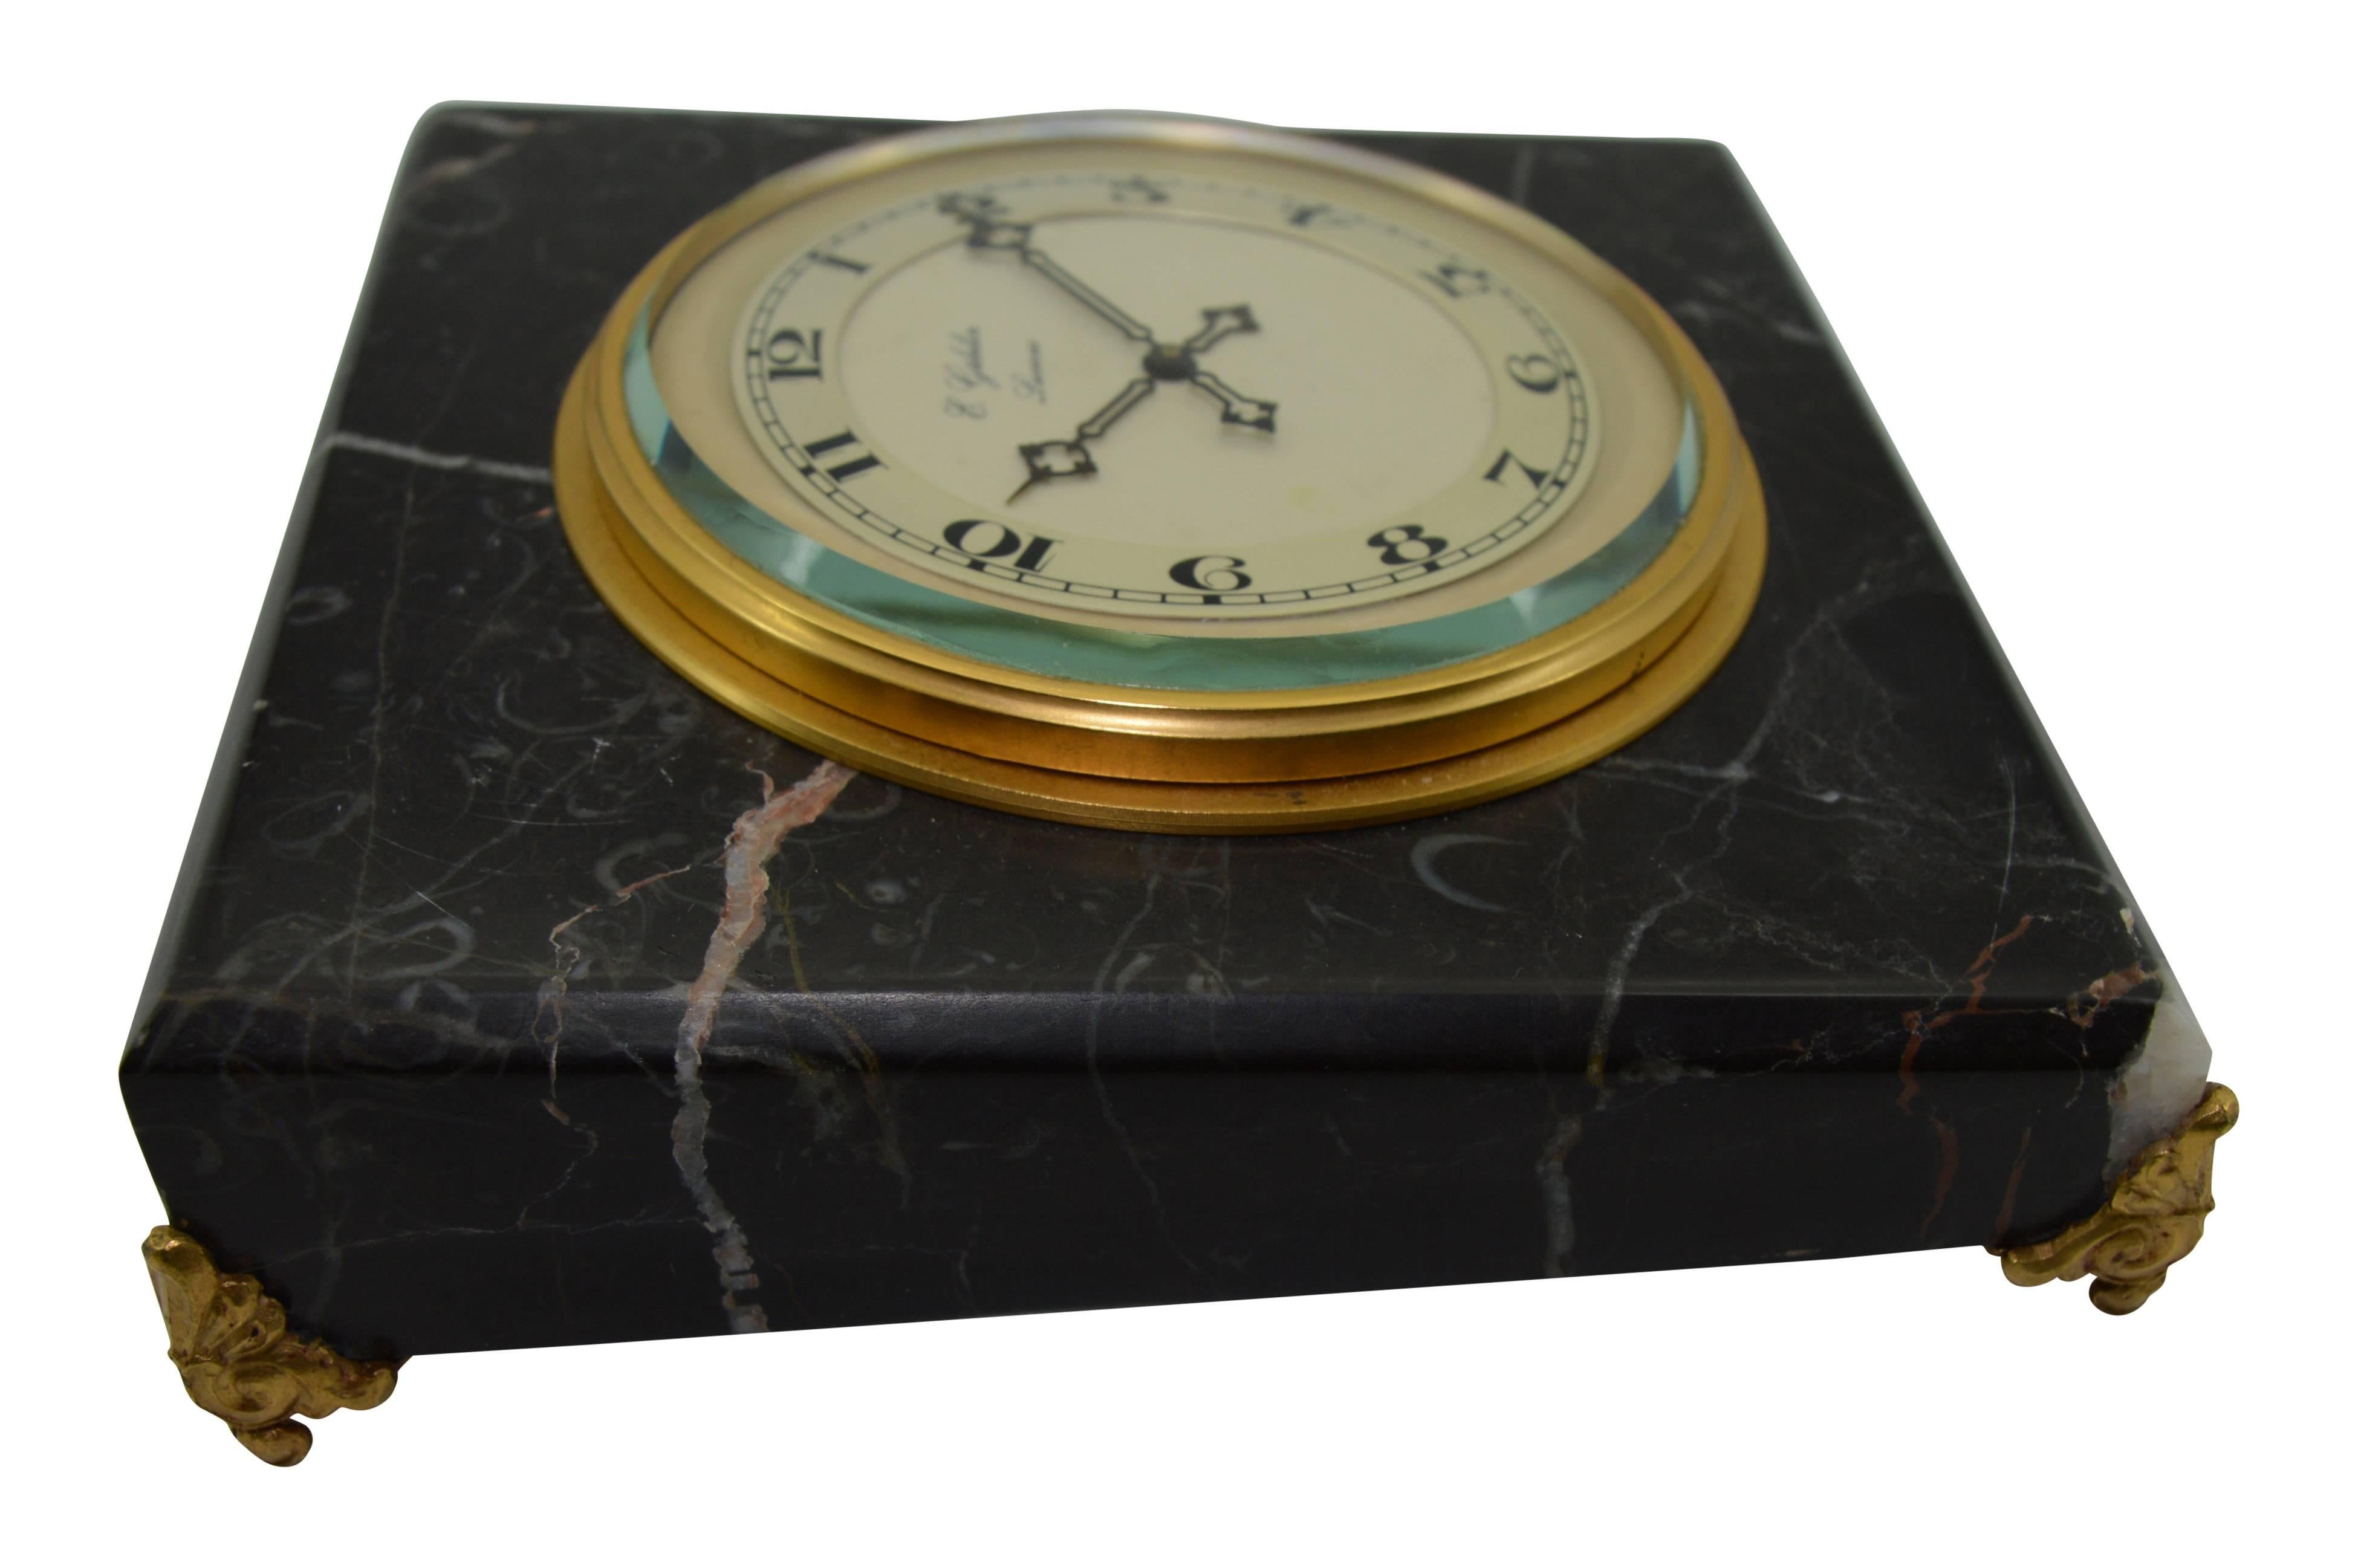 FACTORY / HOUSE: E. Gubelin Watch Company
STYLE / REFERENCE: Table Clock
METAL / MATERIAL: Stone
CIRCA / YEAR: 1930's
DIMENSIONS: 5